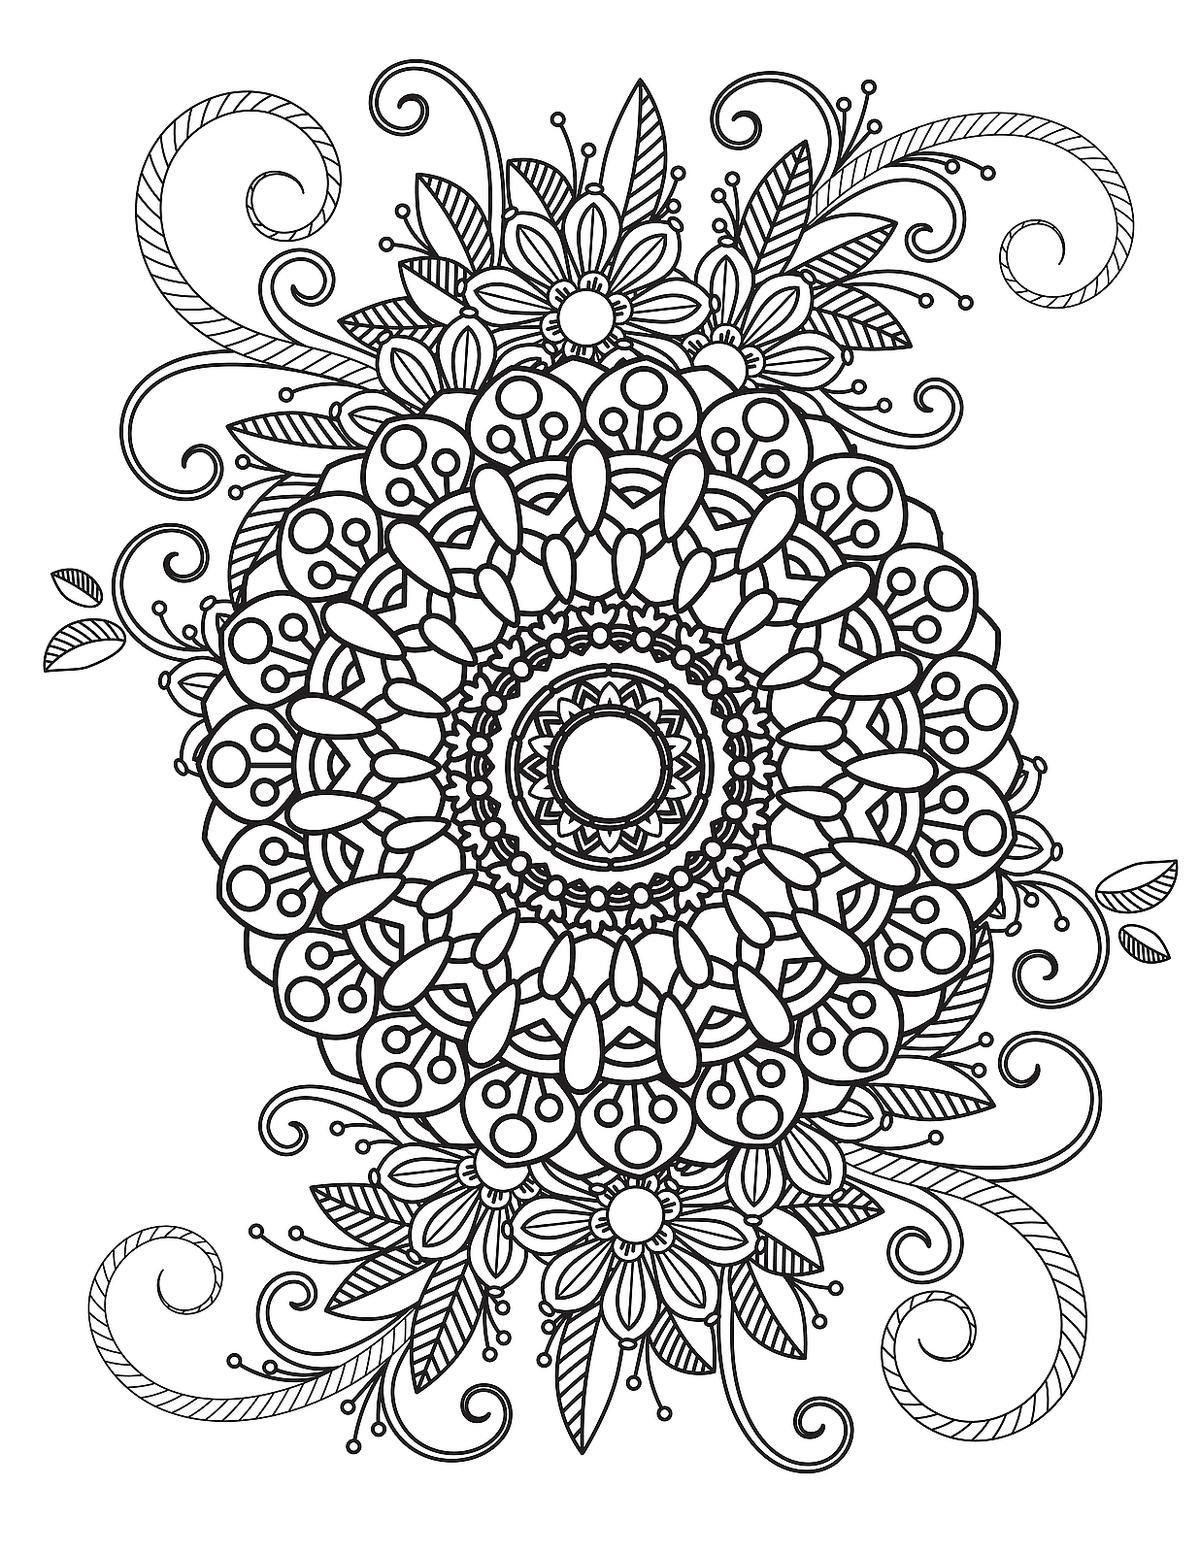 Mandala coloring pages free printable coloring pages of mandalas for adults kids printables seconds mom mandala coloring pages mandala coloring coloring pages to print